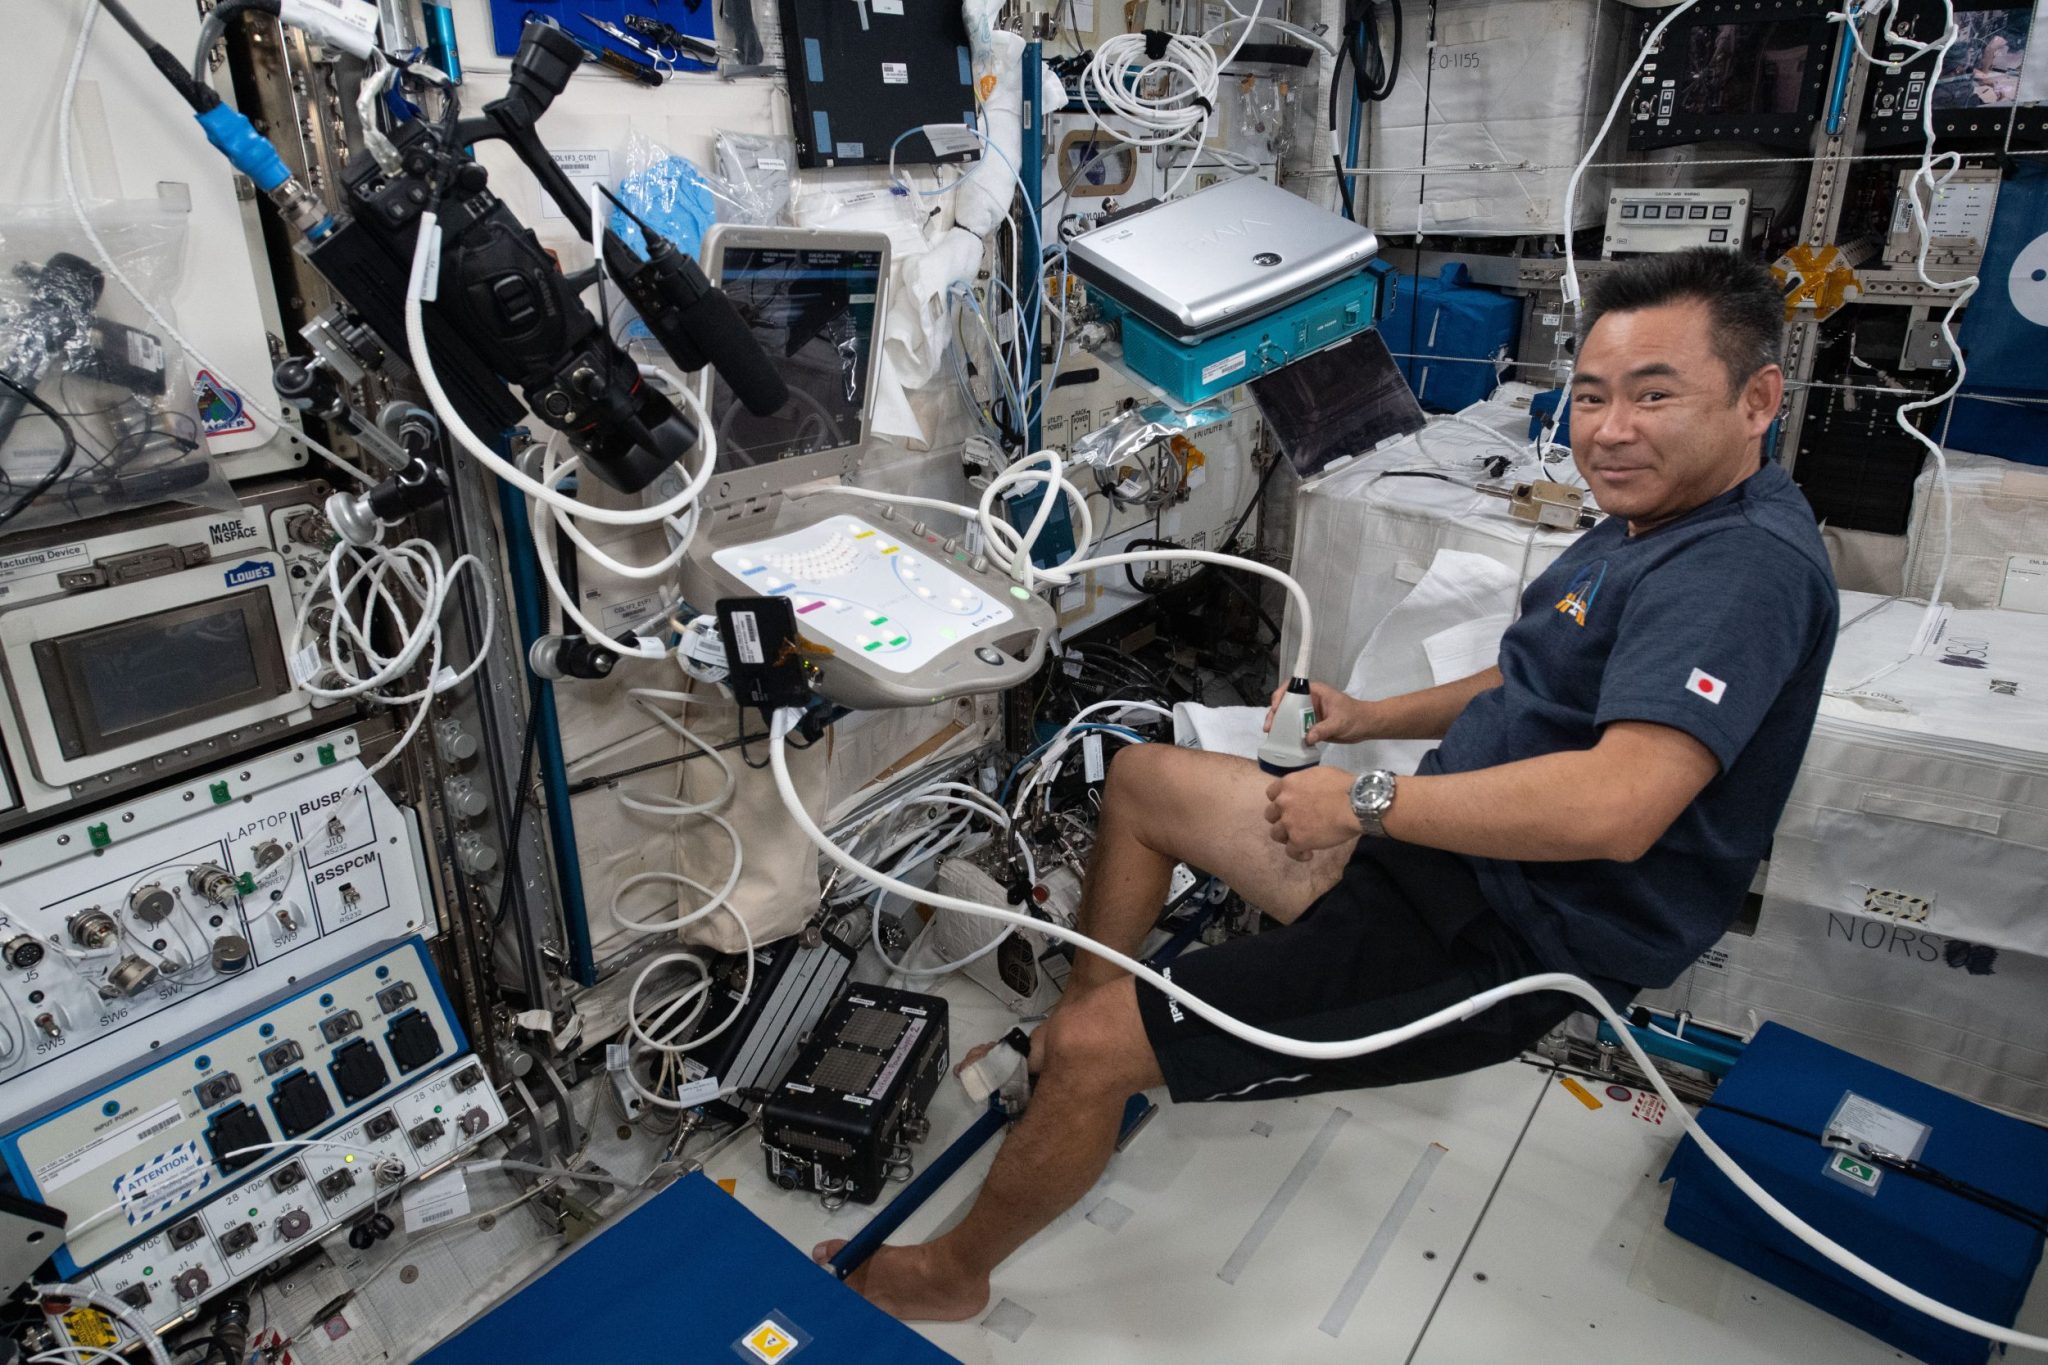 Hoshide wears a blue shirt and black short. He holds a small white device, attached by a white cord to a control panel, against his thigh and looks at the camera. The wall in front of him is a jumble of cords, wires, and equipment.